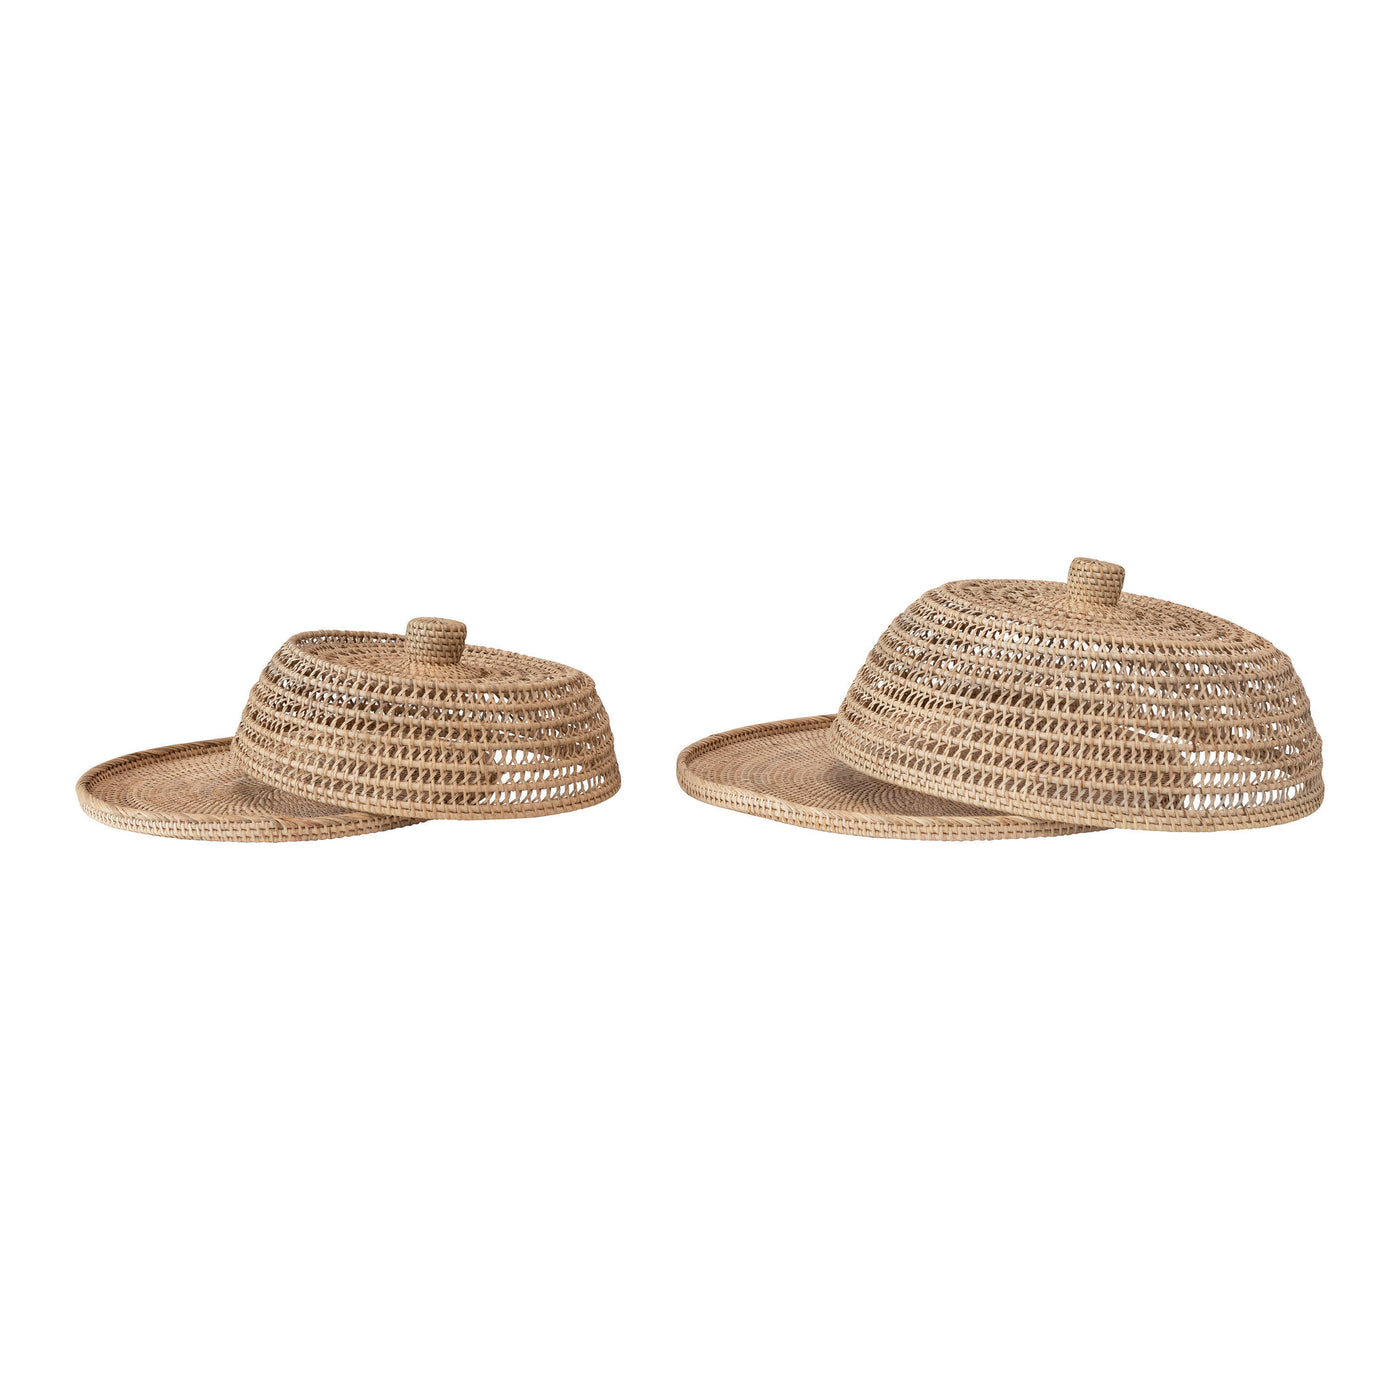 Hand-Woven Rattan Trays with Rattan Food Covers